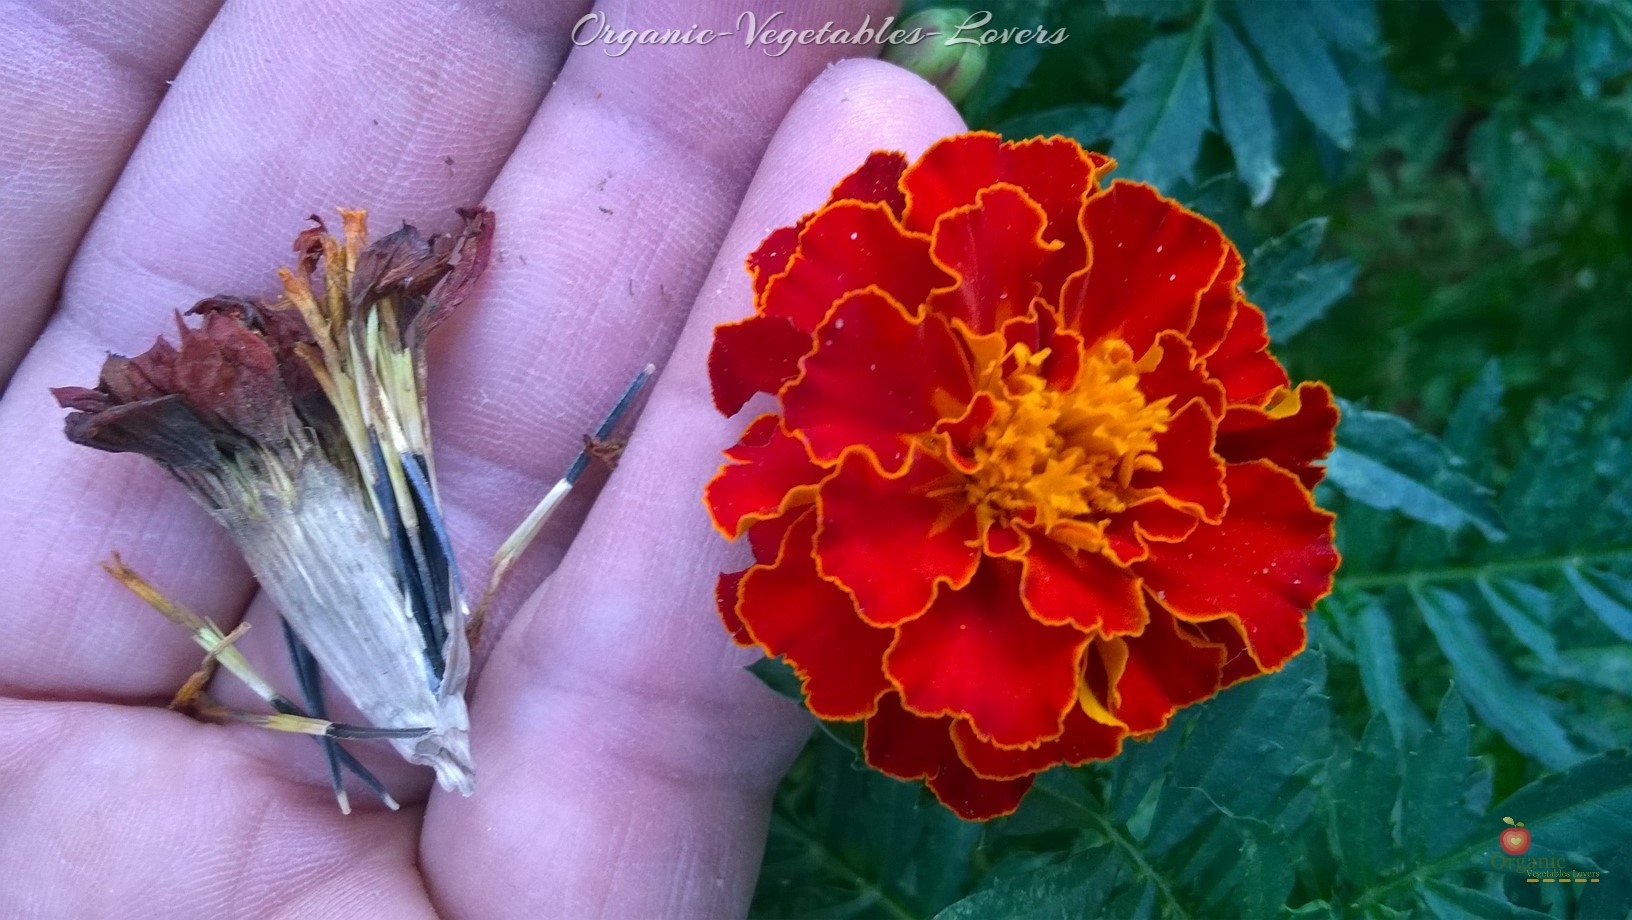 When marigold flower head begins to die off and is mostly dry and brown, grasp the flower head "the petals only", and carefully pull the flower petals from the flower.